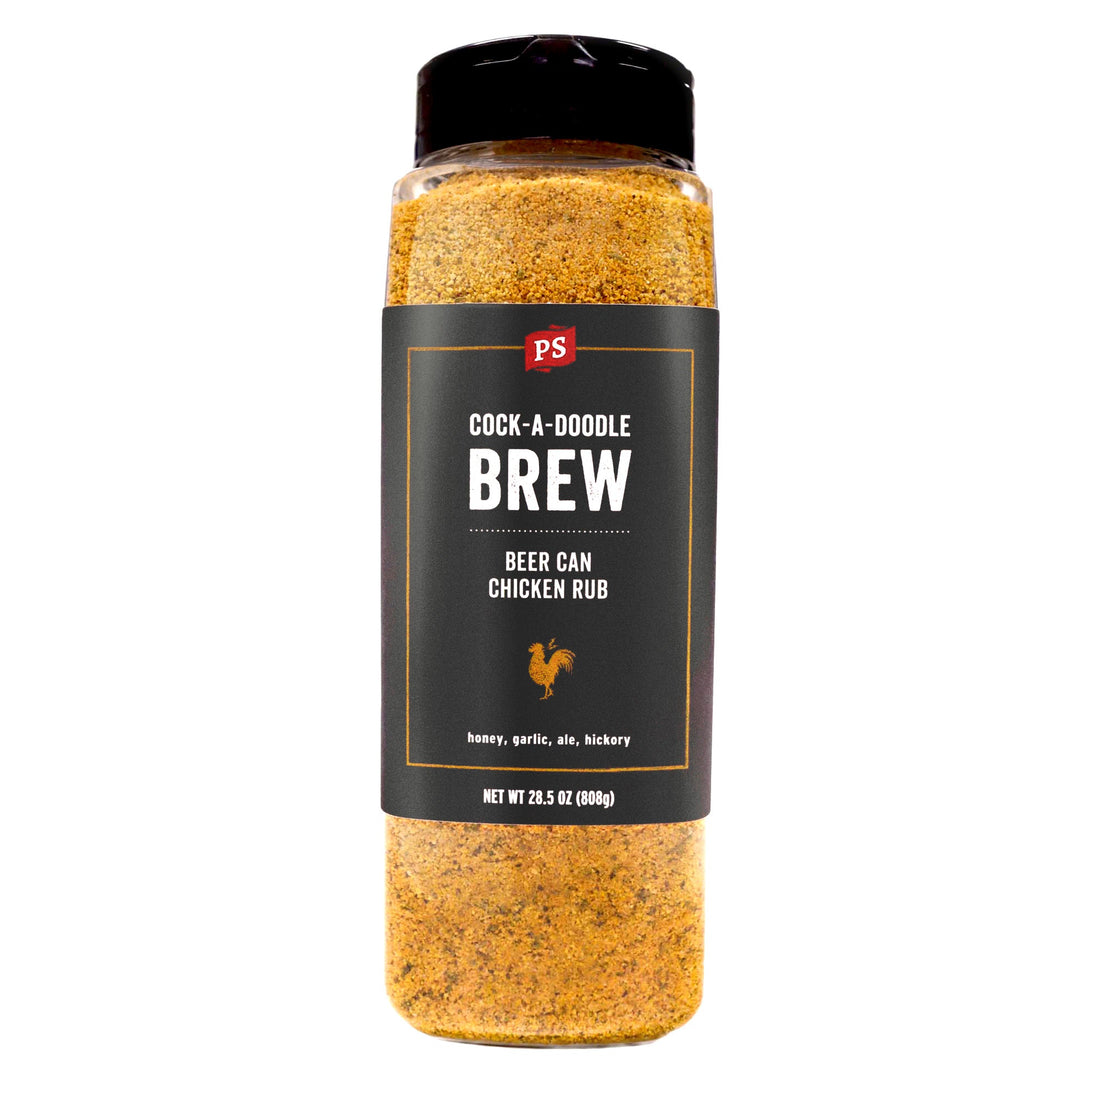 Cock-A-Doodle Brew - Beer Can Chicken Rub